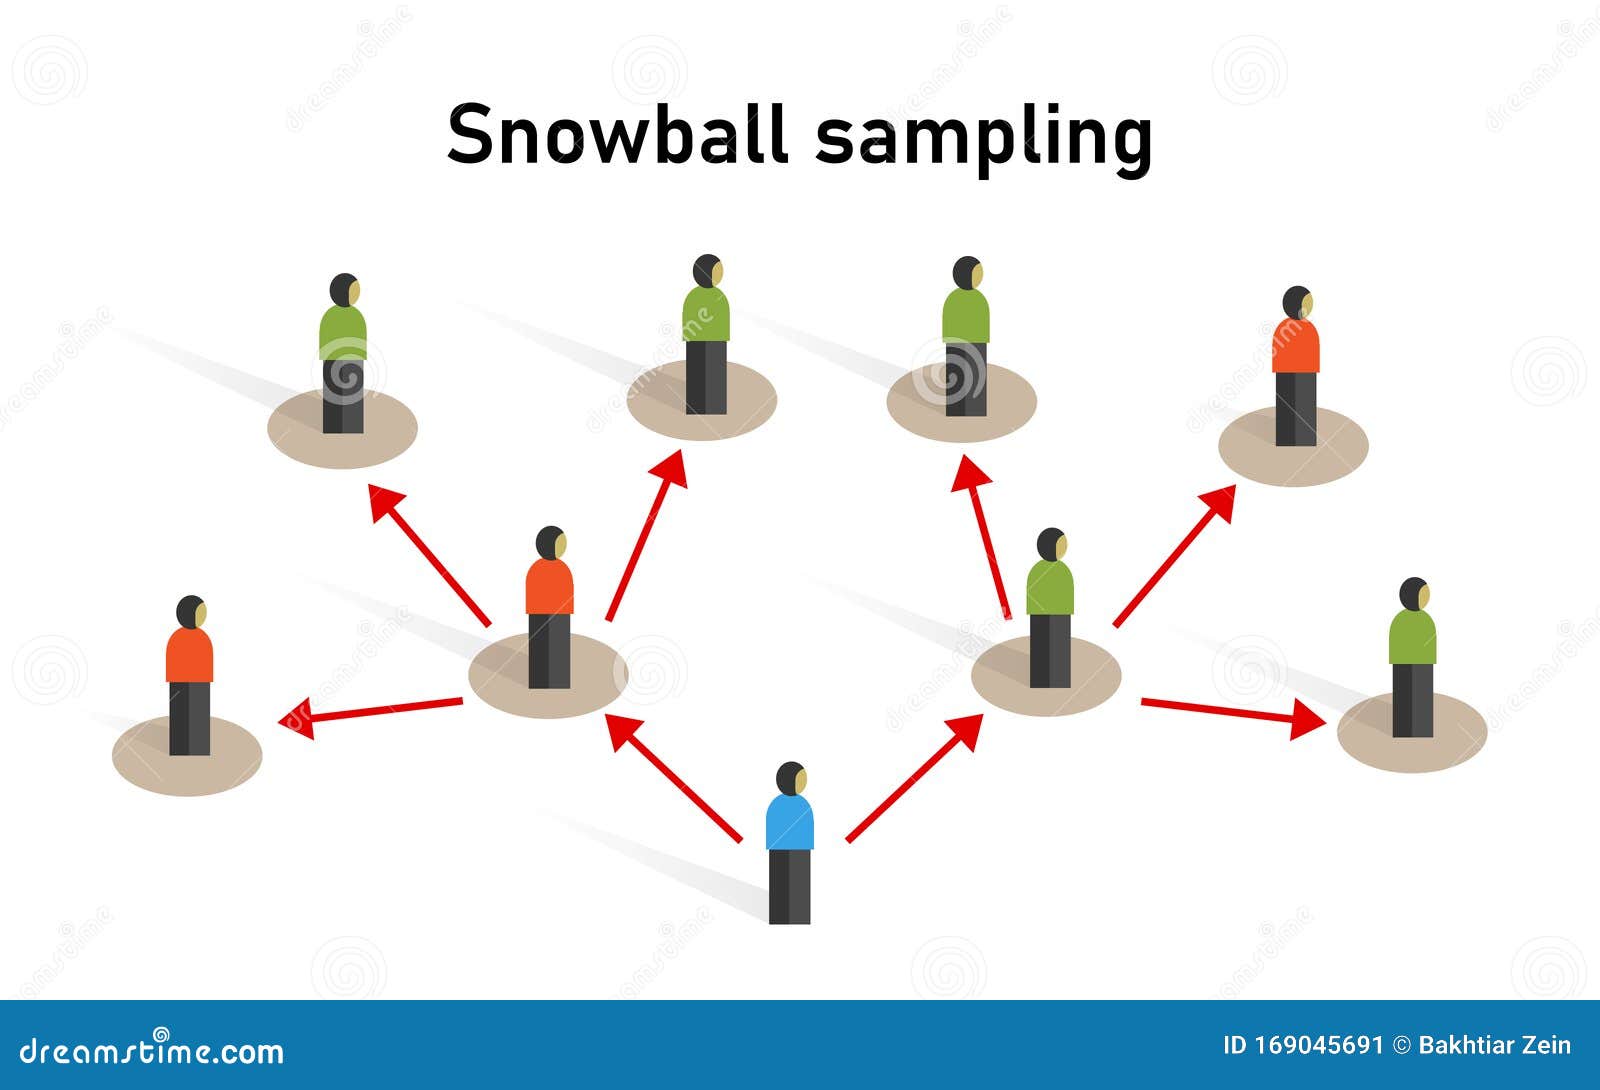 snowball sampling sample taken from a group of people sampling statistic method research participants recruit other